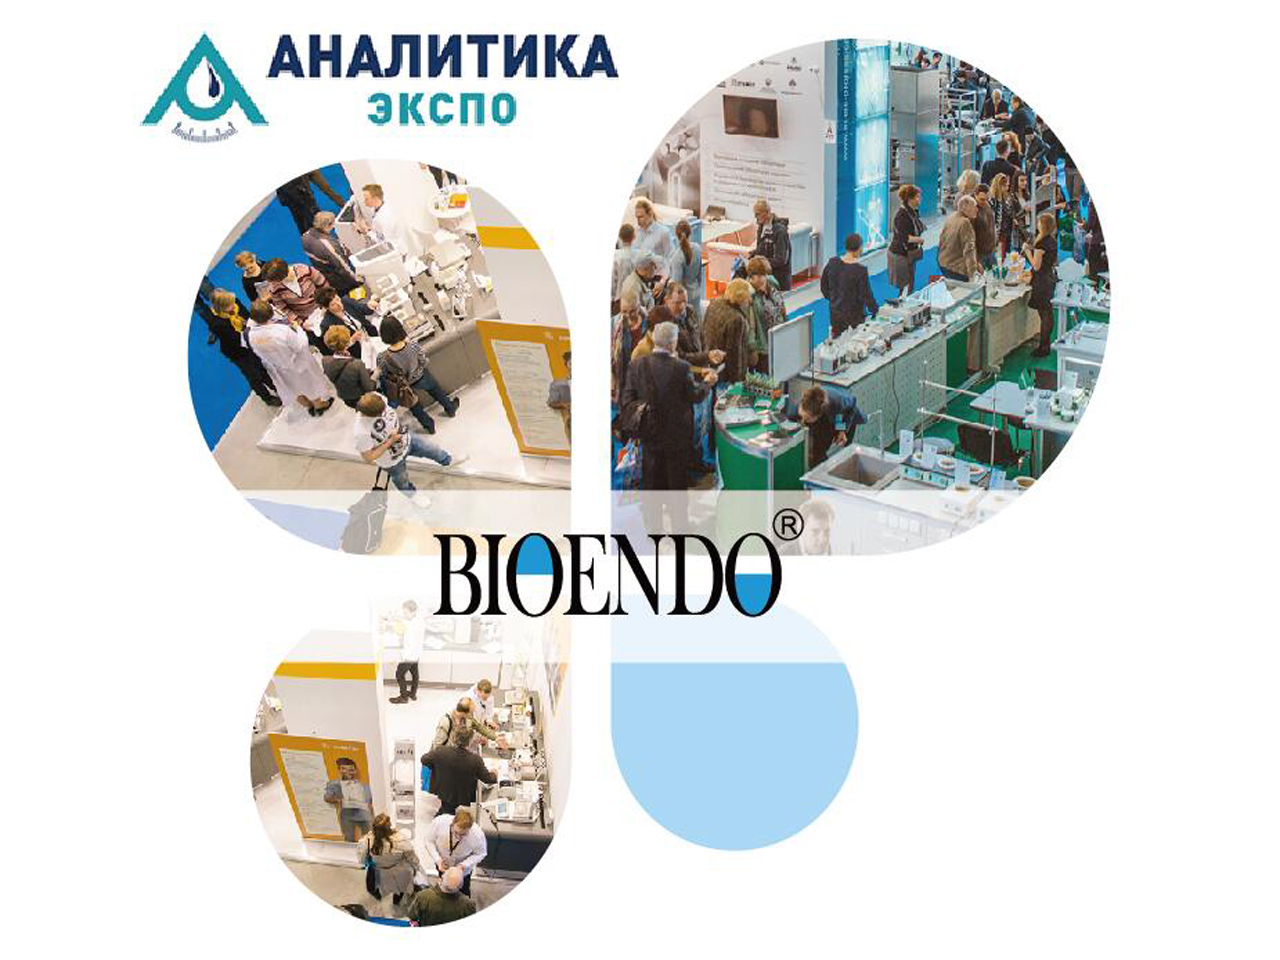 2019 Russia, Moscow, Laboratory Instrument & Chemical Reagents Show